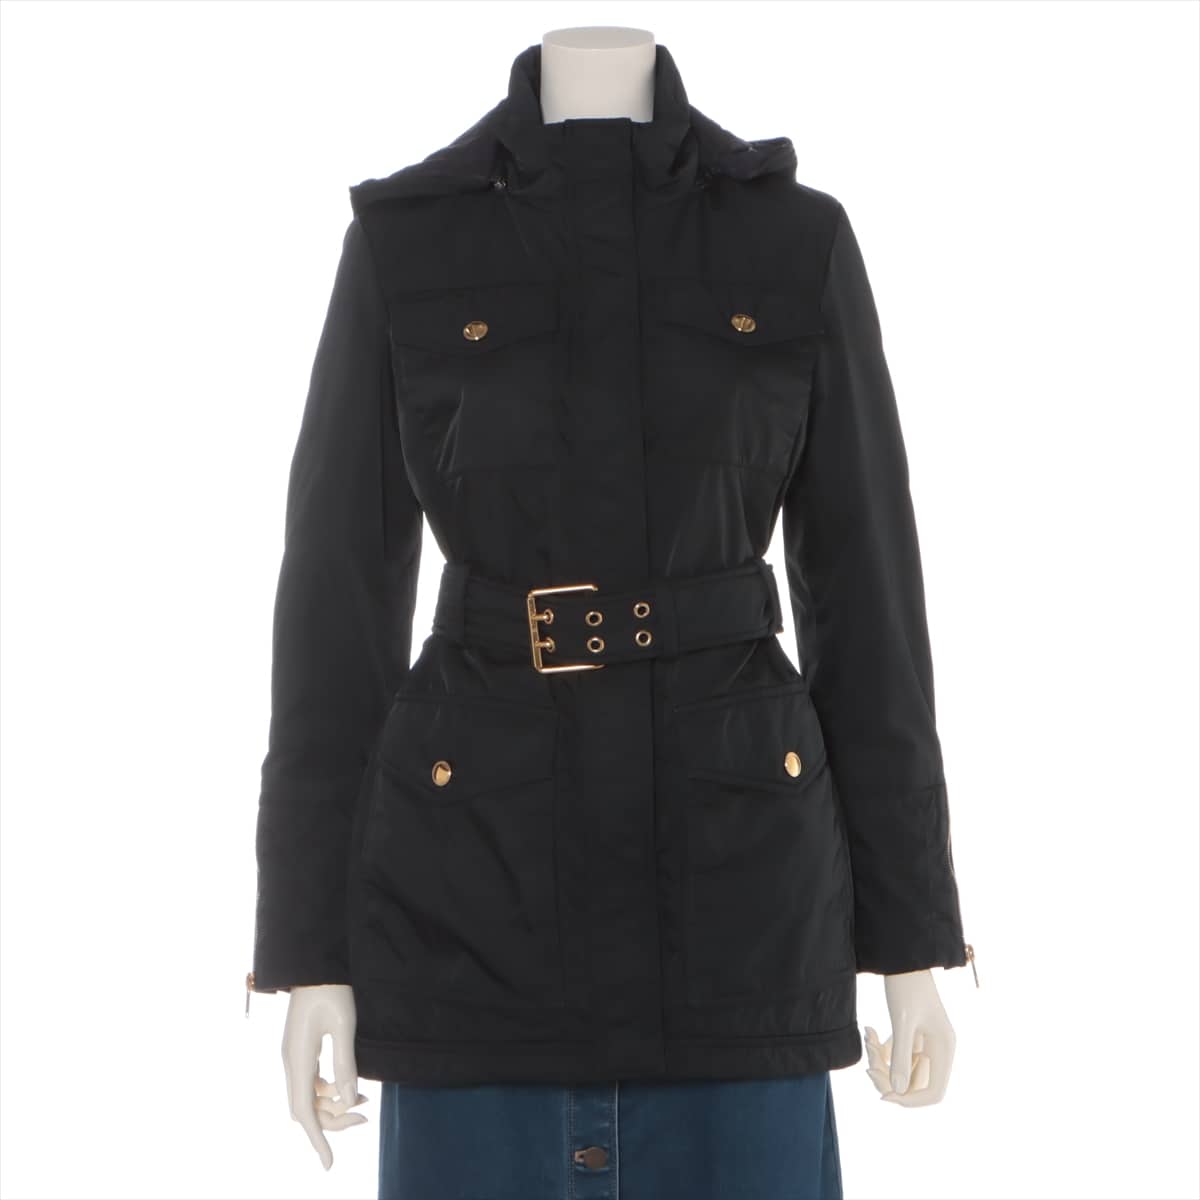 Gucci 12 years Polyester & Nylon Insulated jacket 38 Ladies' Black  297644 Removable hood